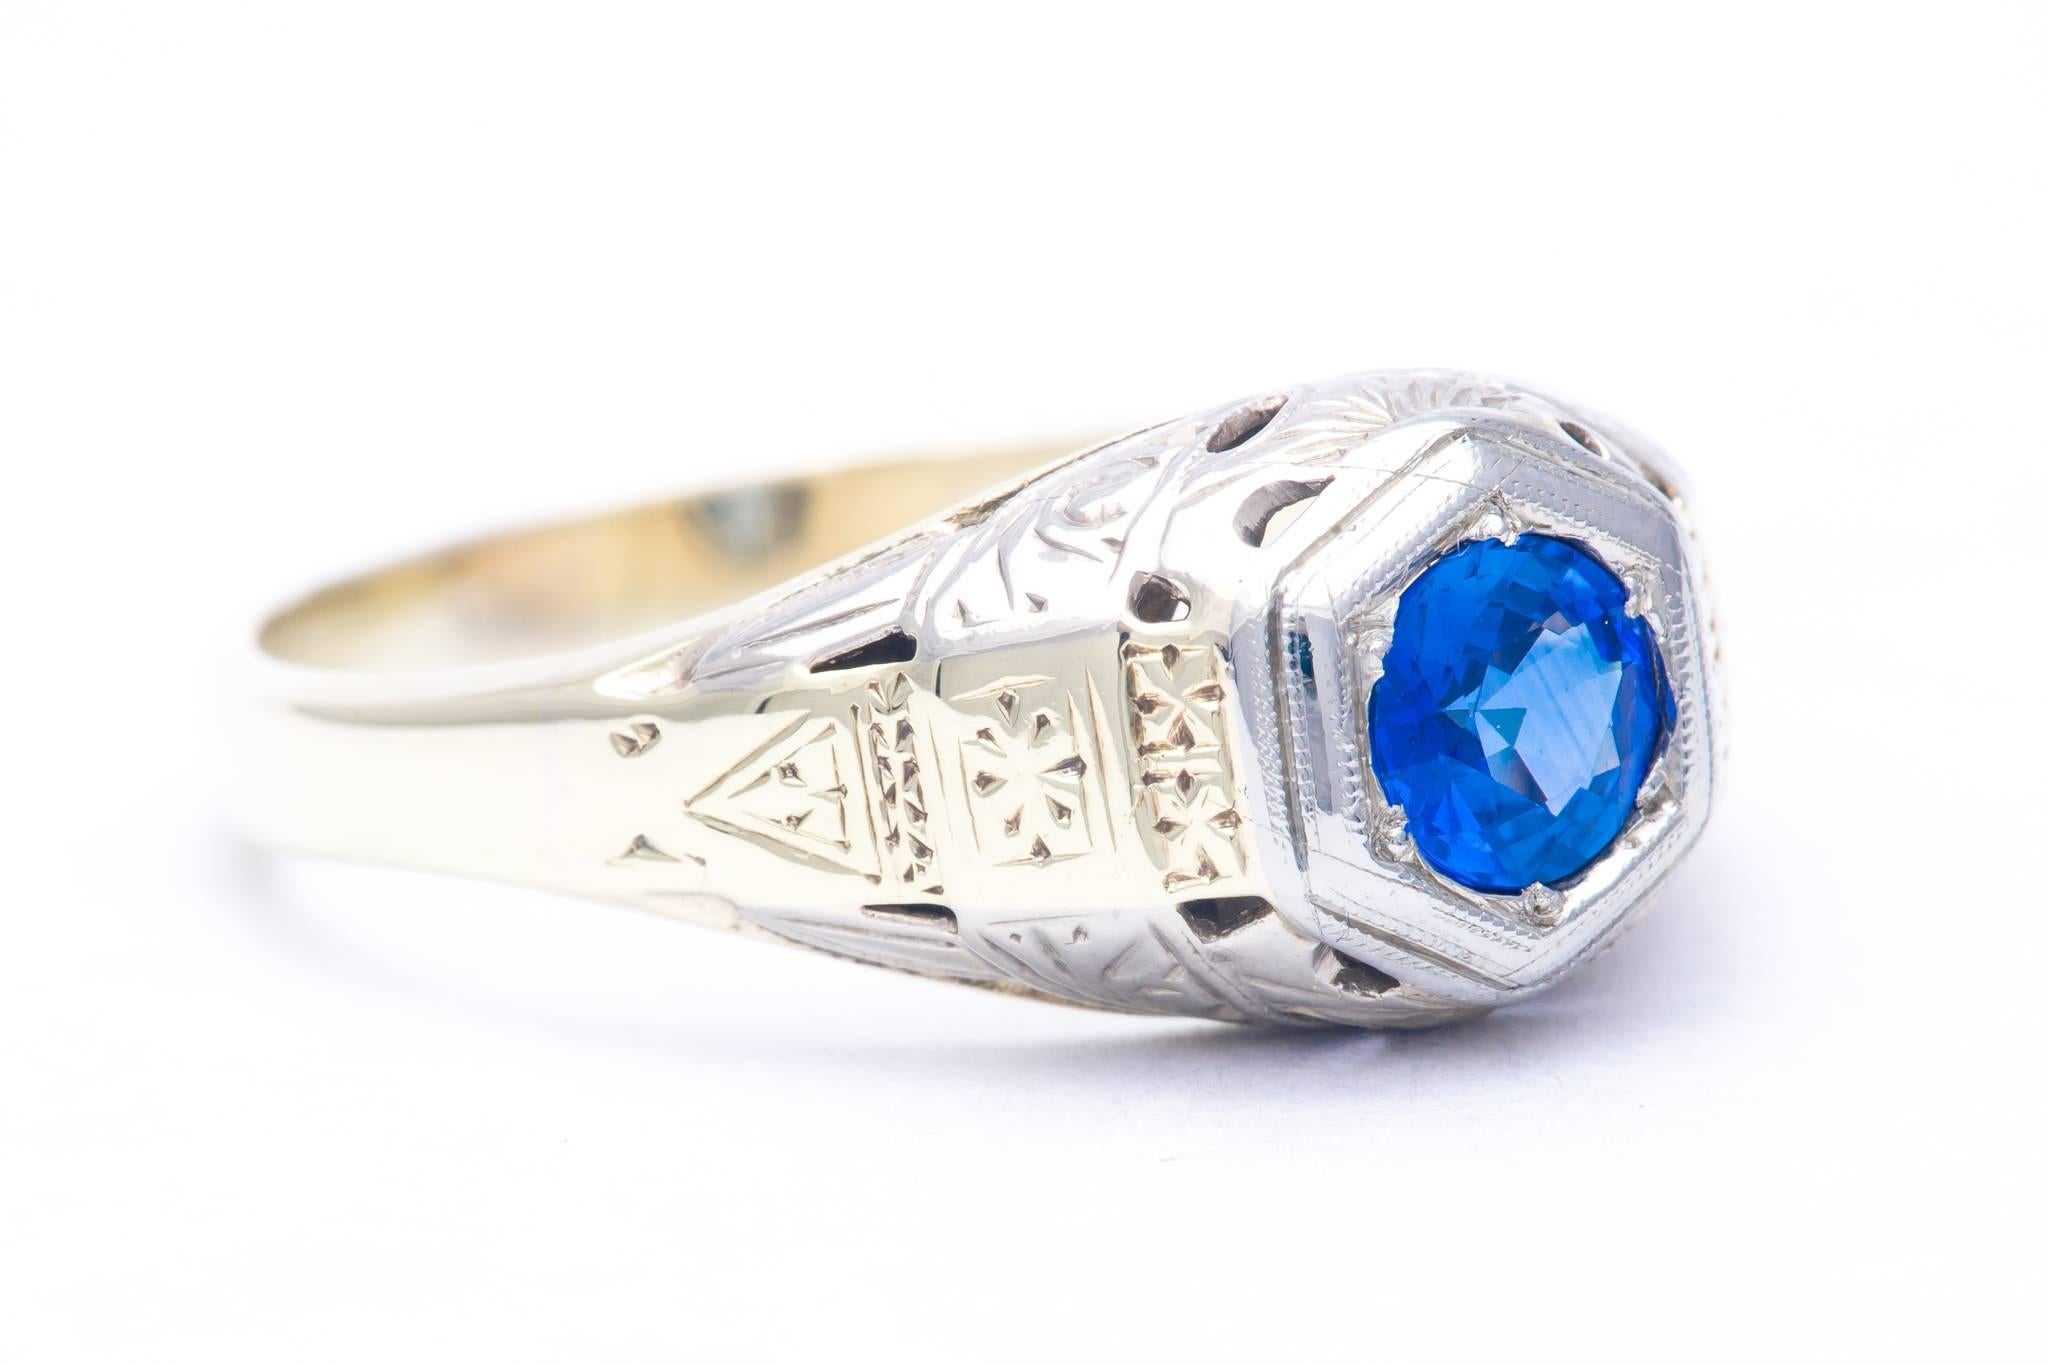 A beautiful art deco period mens sapphire ring in 14 karat white, and yellow gold.  Featuring beautiful hand engraving and a unique bi color design this ring also boasts a wonderful vivid blue center sapphire set in white gold.

Grading as VS